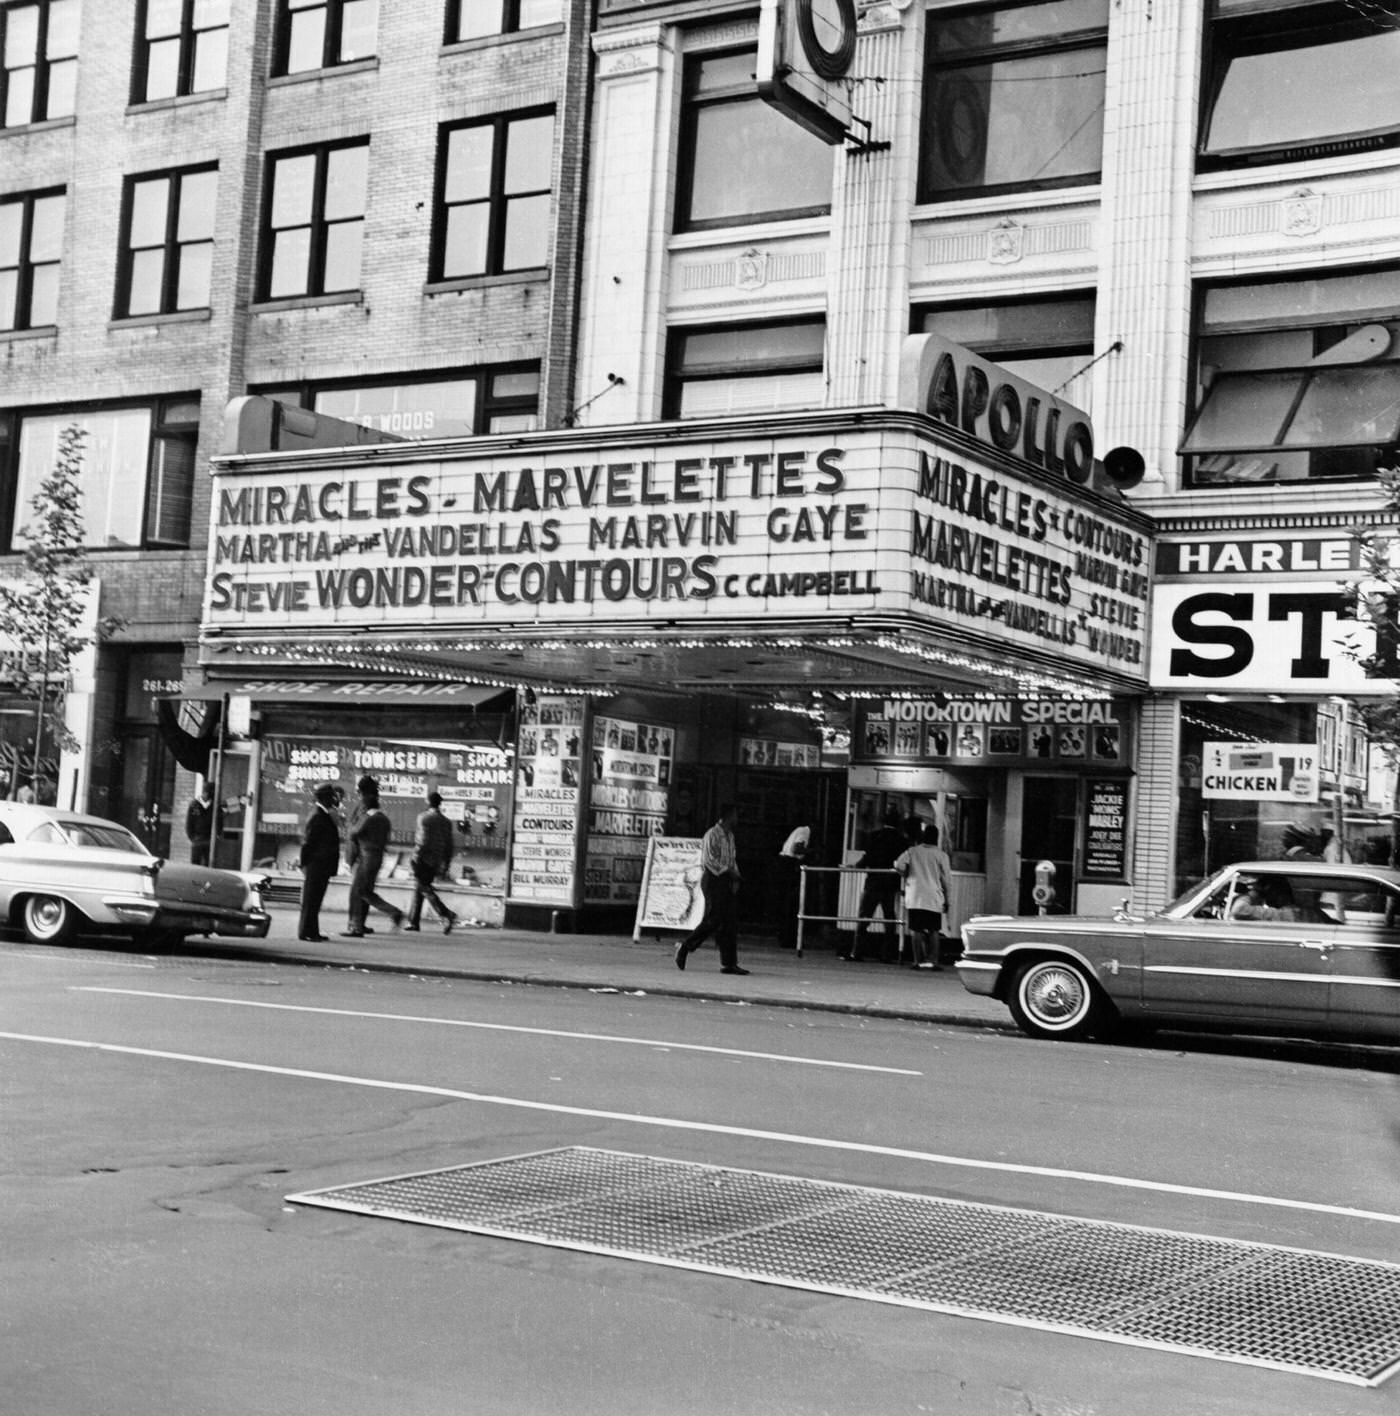 The Apollo Theater In Harlem Advertising Concerts By The Miracles, The Marvelettes, Martha And The Vandellas, Marvin Gaye, Stevie Wonder, The Contours, And Choker Campbell, Manhattan, 1963